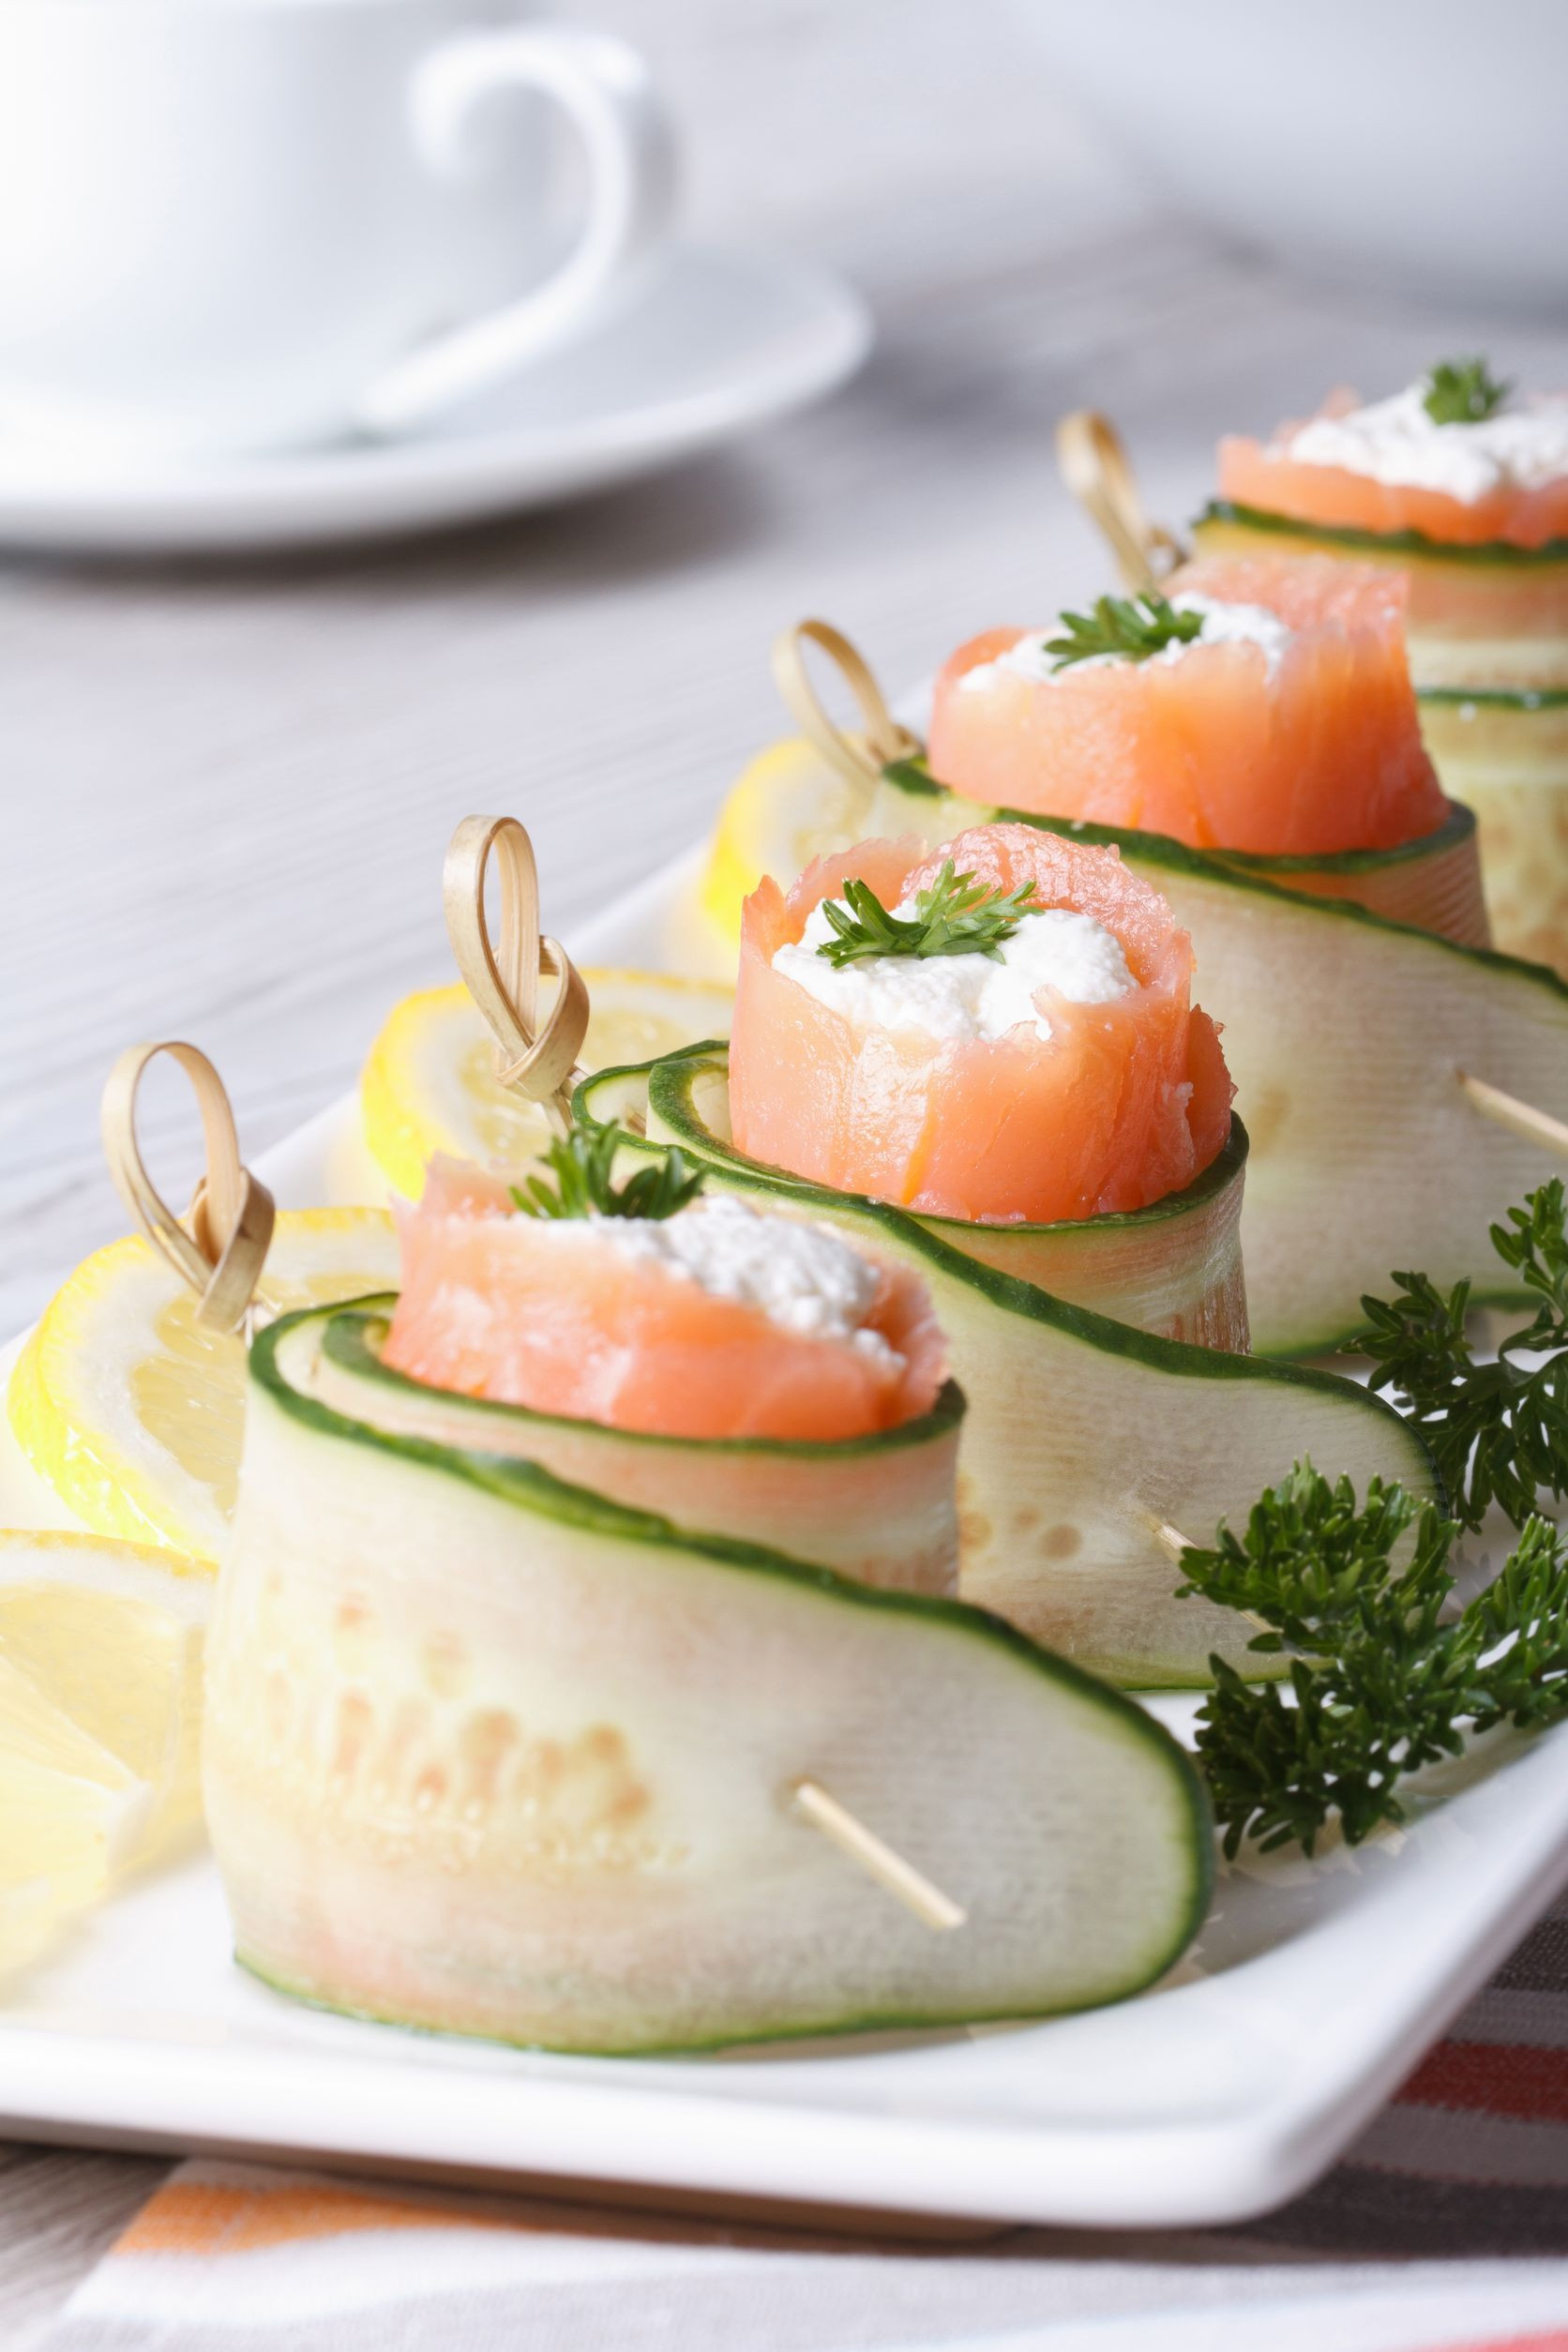 Cream Cheese Recipes Appetizers
 smoked salmon and cream cheese recipes appetizers